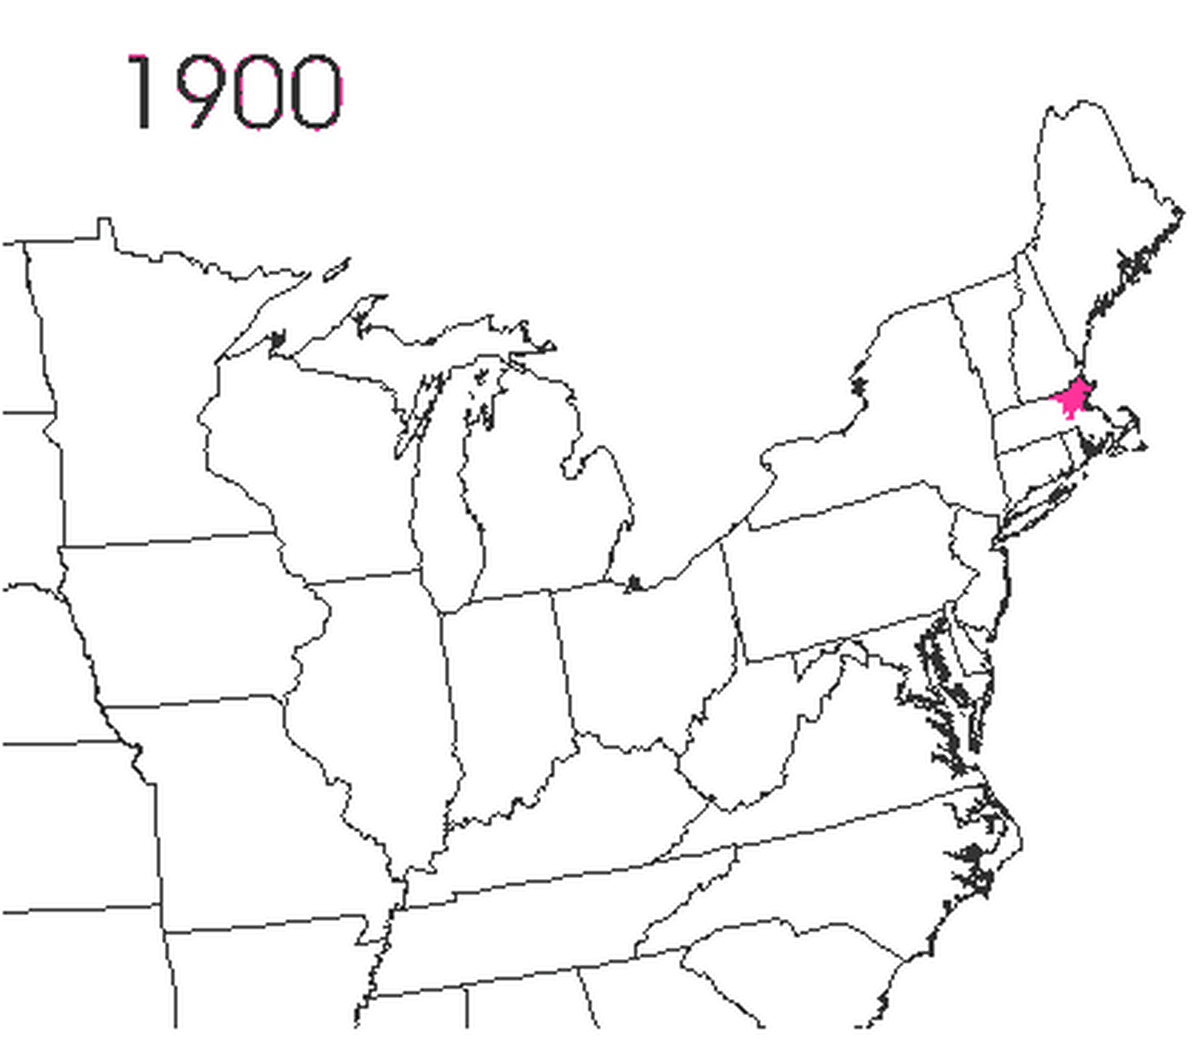 The Spread of the L. dispar Caterpillar in the USA Over Time